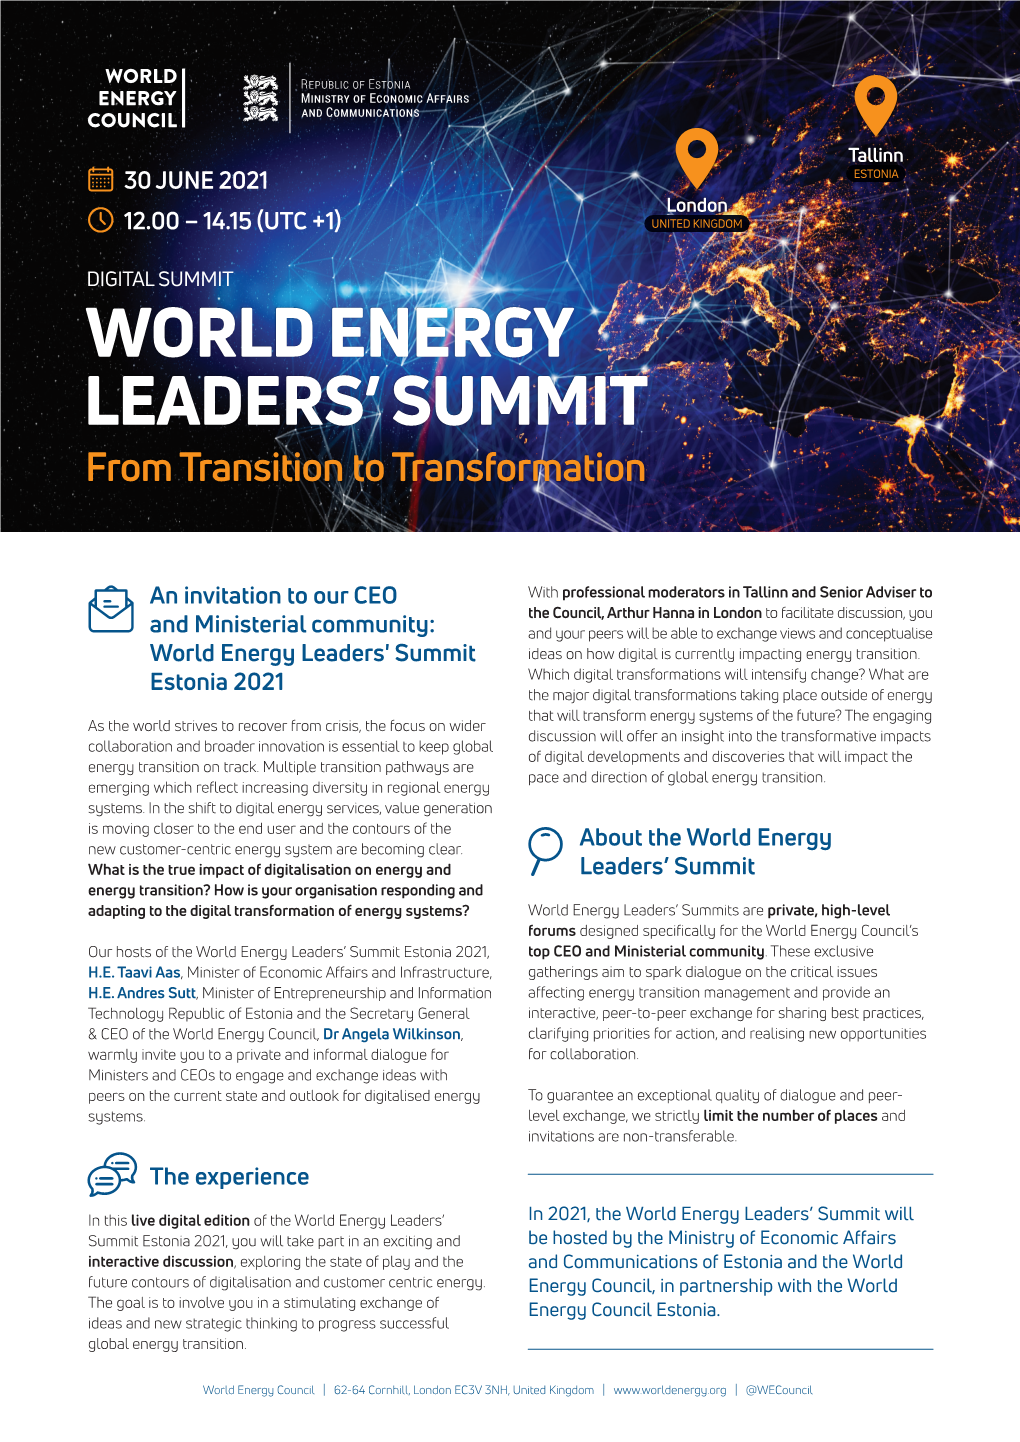 World Energy Leaders' Summit Ideas on How Digital Is Currently Impacting Energy Transition